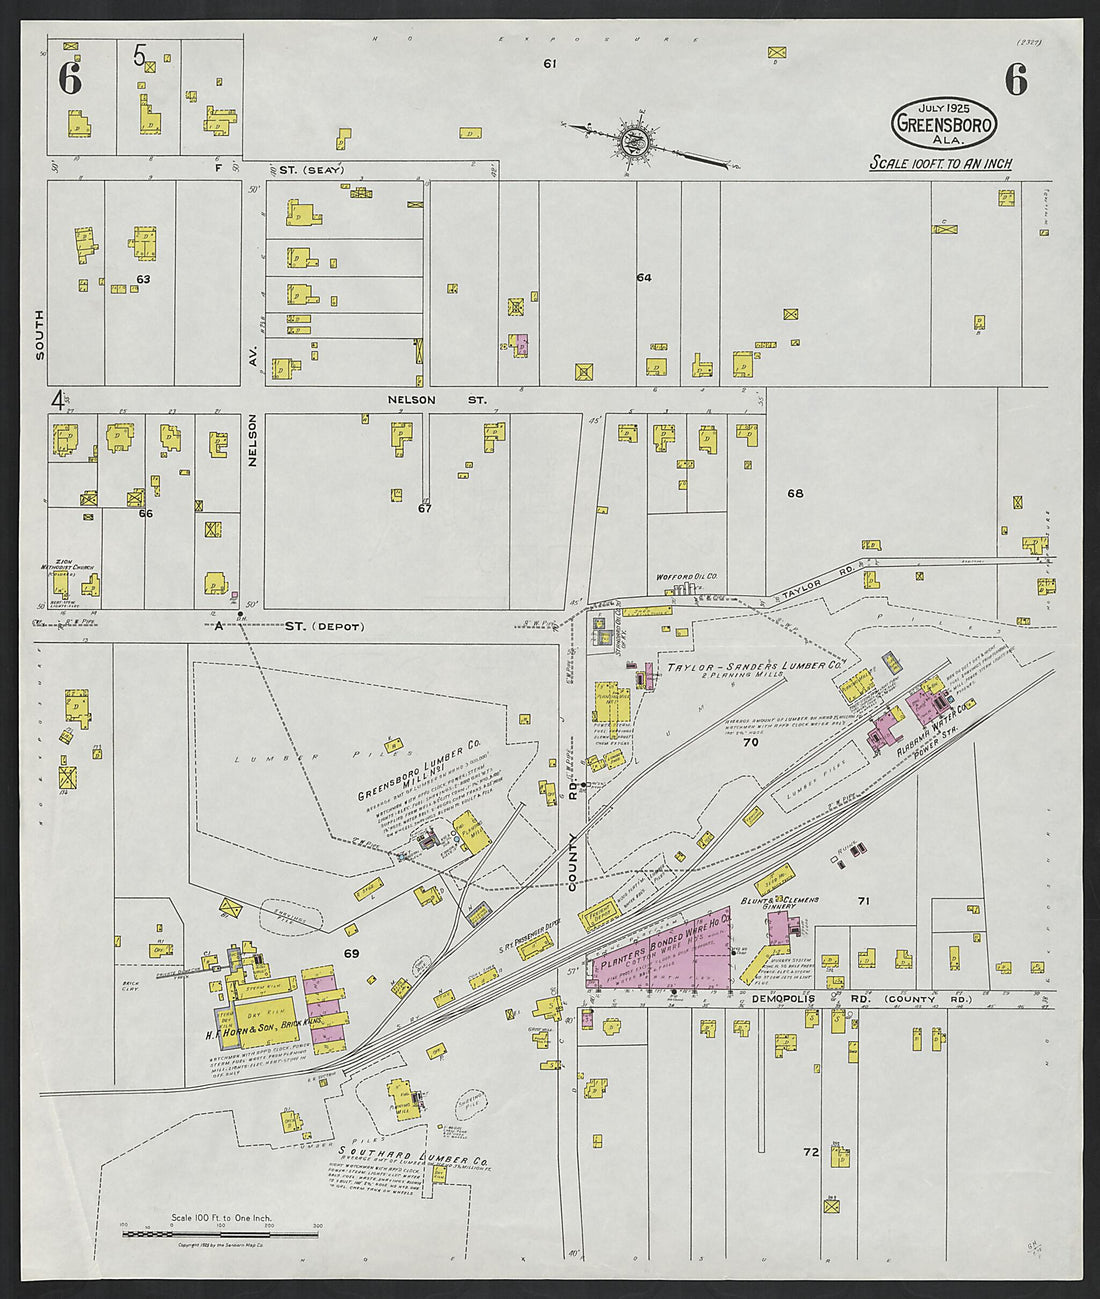 This old map of Greensboro, Hale County, Alabama was created by Sanborn Map Company in 1925